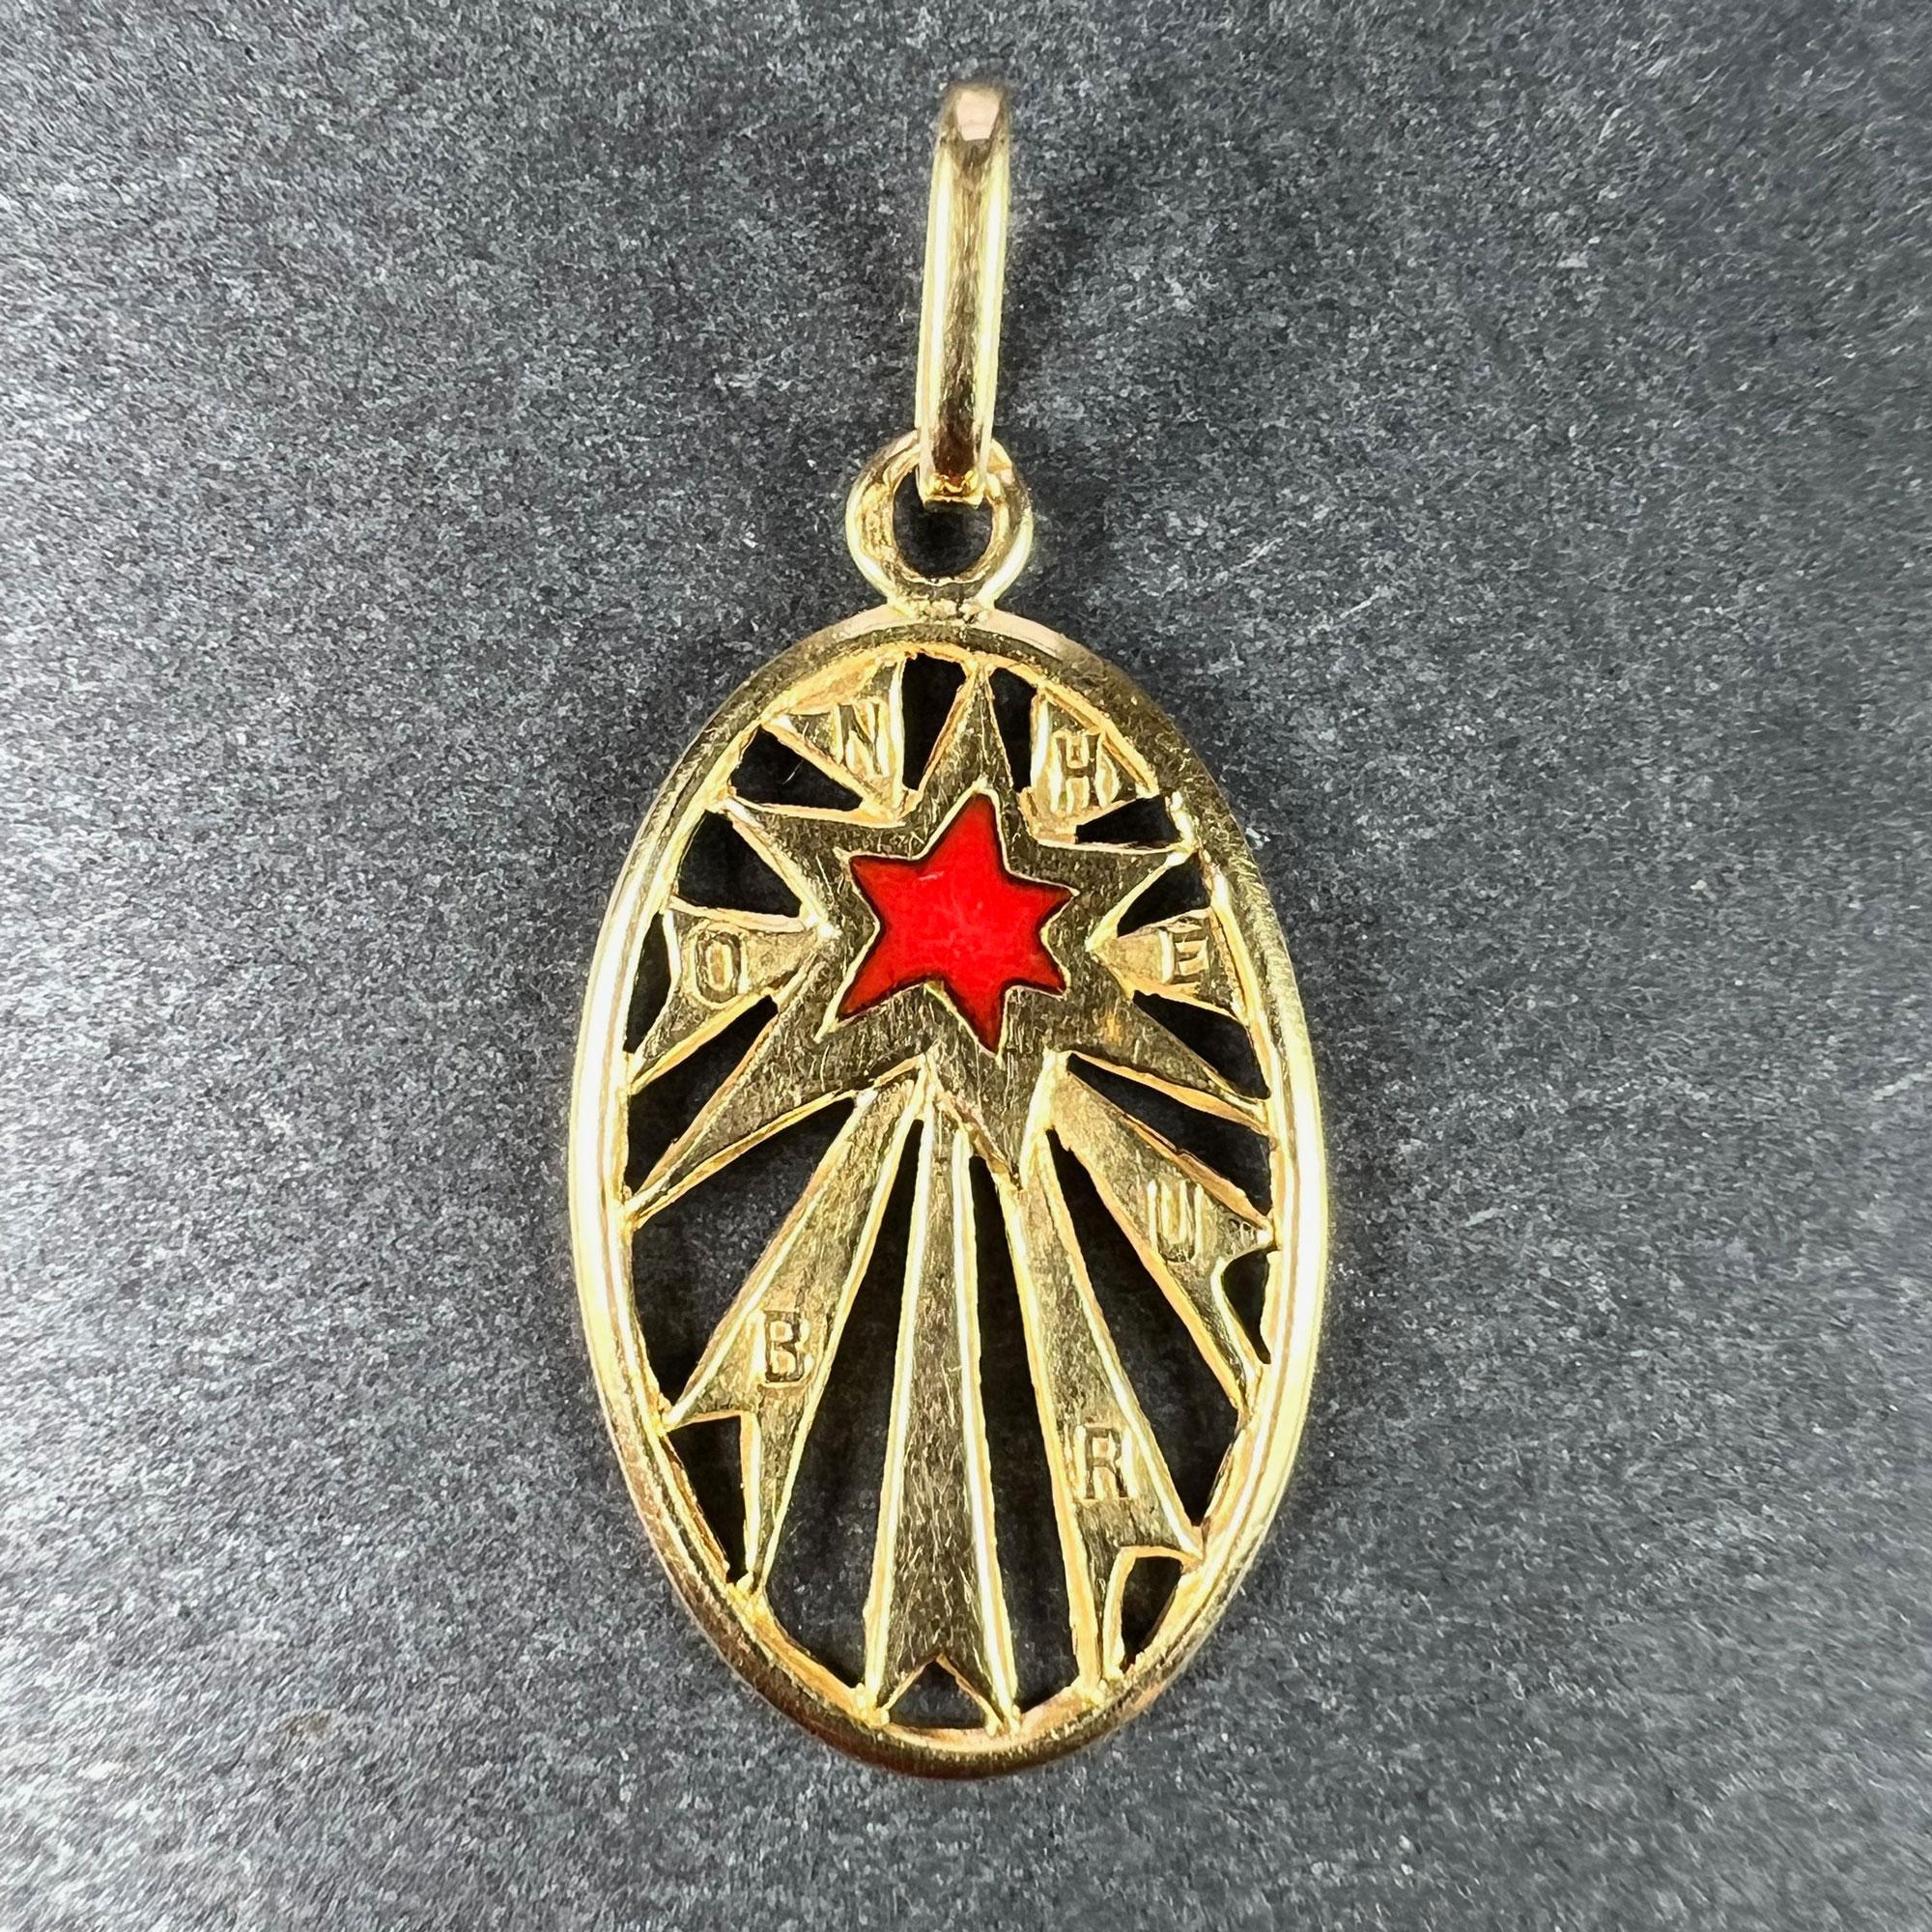 A French 18 karat (18K) yellow gold good luck charm pendant designed as an oval with a red enamel lucky star with radiating lines, with a raised letters spelling the word  'Bonheur' (meaning 'good luck'). 

Stamped with the eagle's head for French